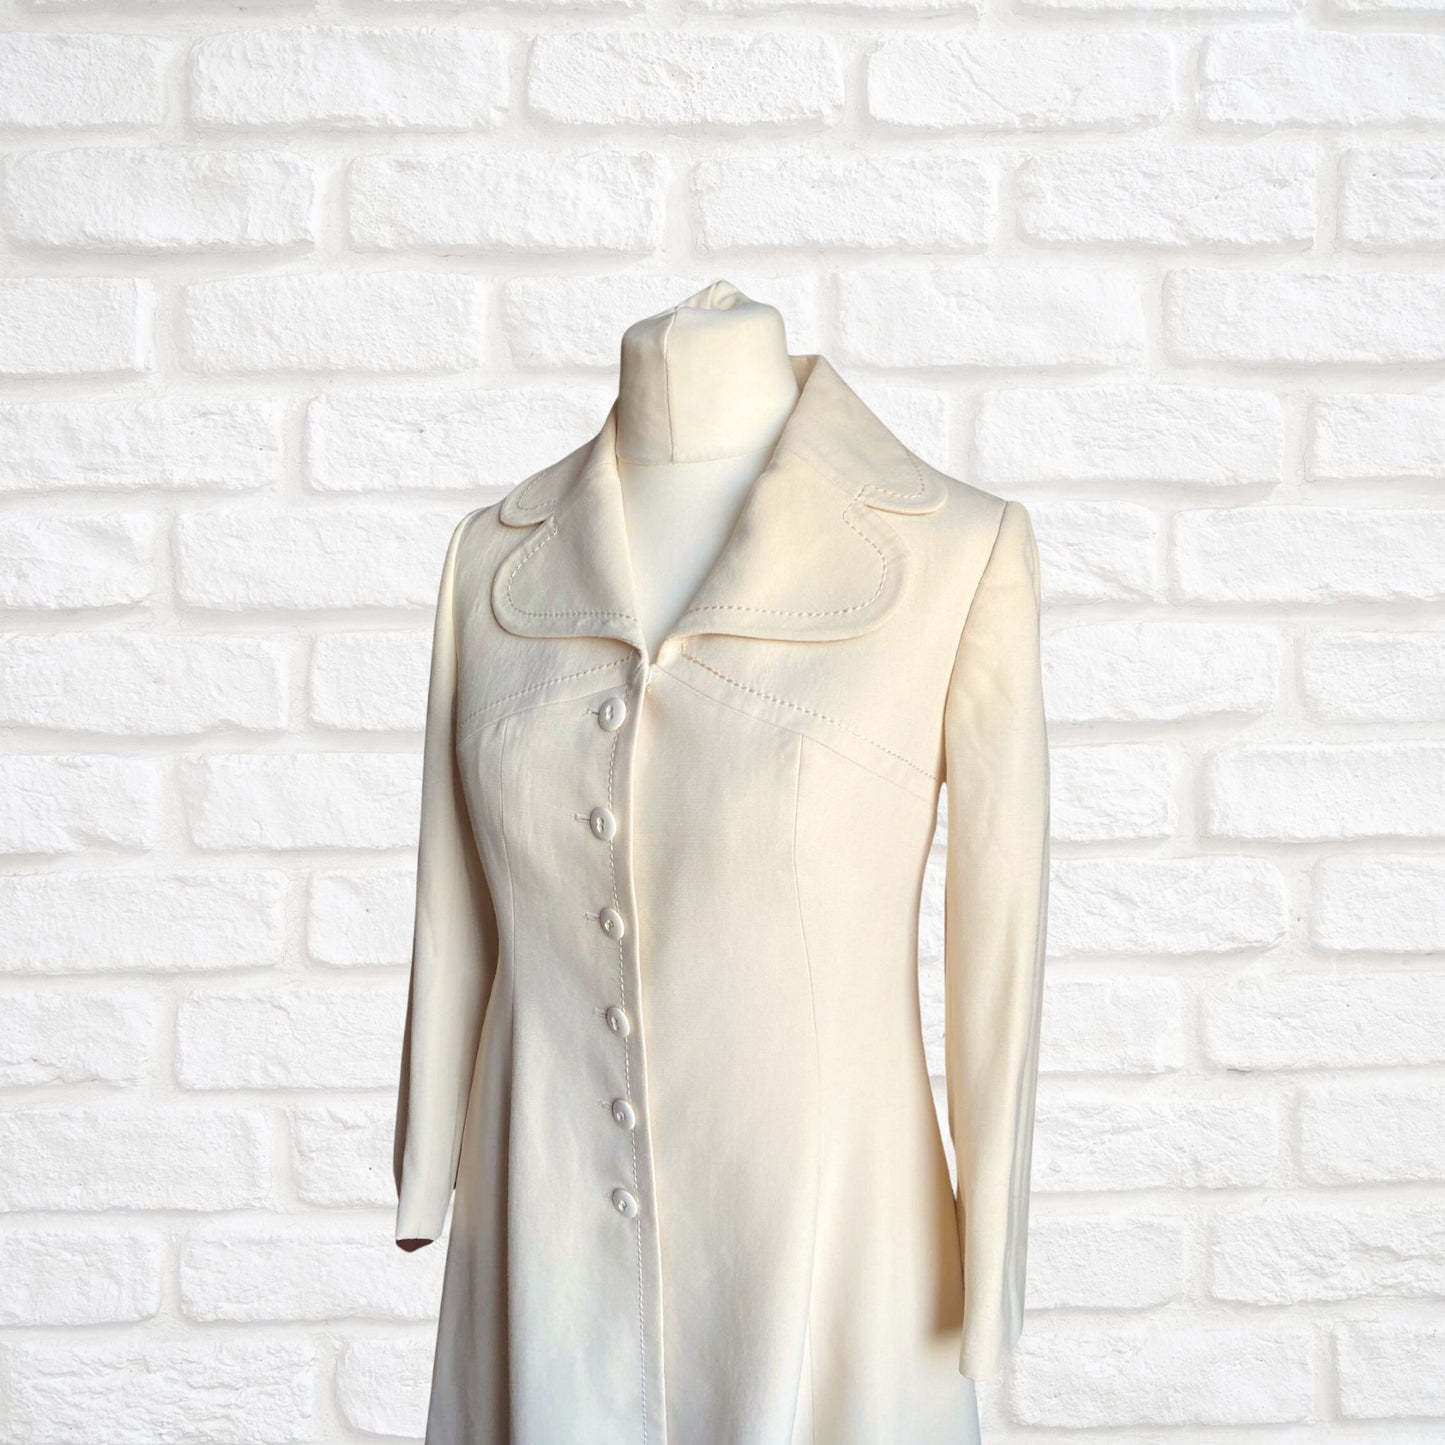 Vintage Creamy White Lightweight 60s Mod Coat with Rounded Collar . Approx UK size 10-12